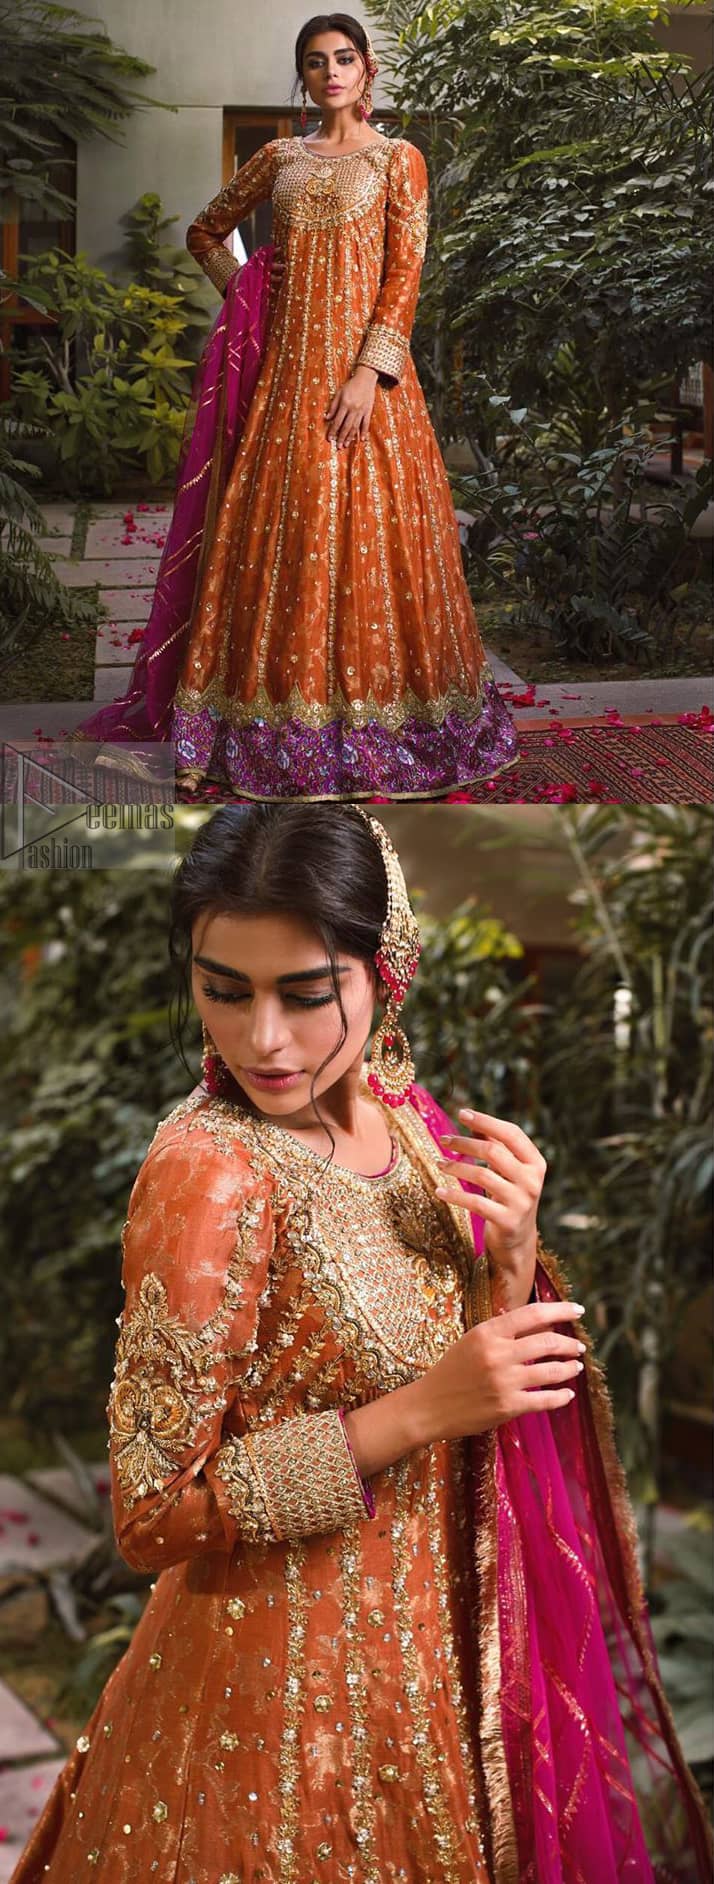 Let the crowd stare and make it worth their while when you walk wearing this anarkali frock. Designed to flaunt your best features, the bodice carries intricate zardozi work. Furthermore this multiple panel frock is enhanced with gota work and beautiful applique on bottom embellished with golden kora, dabka, tilla, sequins and beads work. Pair it up with pink churidar pajama and pink organza dupatta emphasized with gota work and four sided kiran lace. Upholding the idea of simple is beautiful, you would definitely want to wear this for your next occasion.